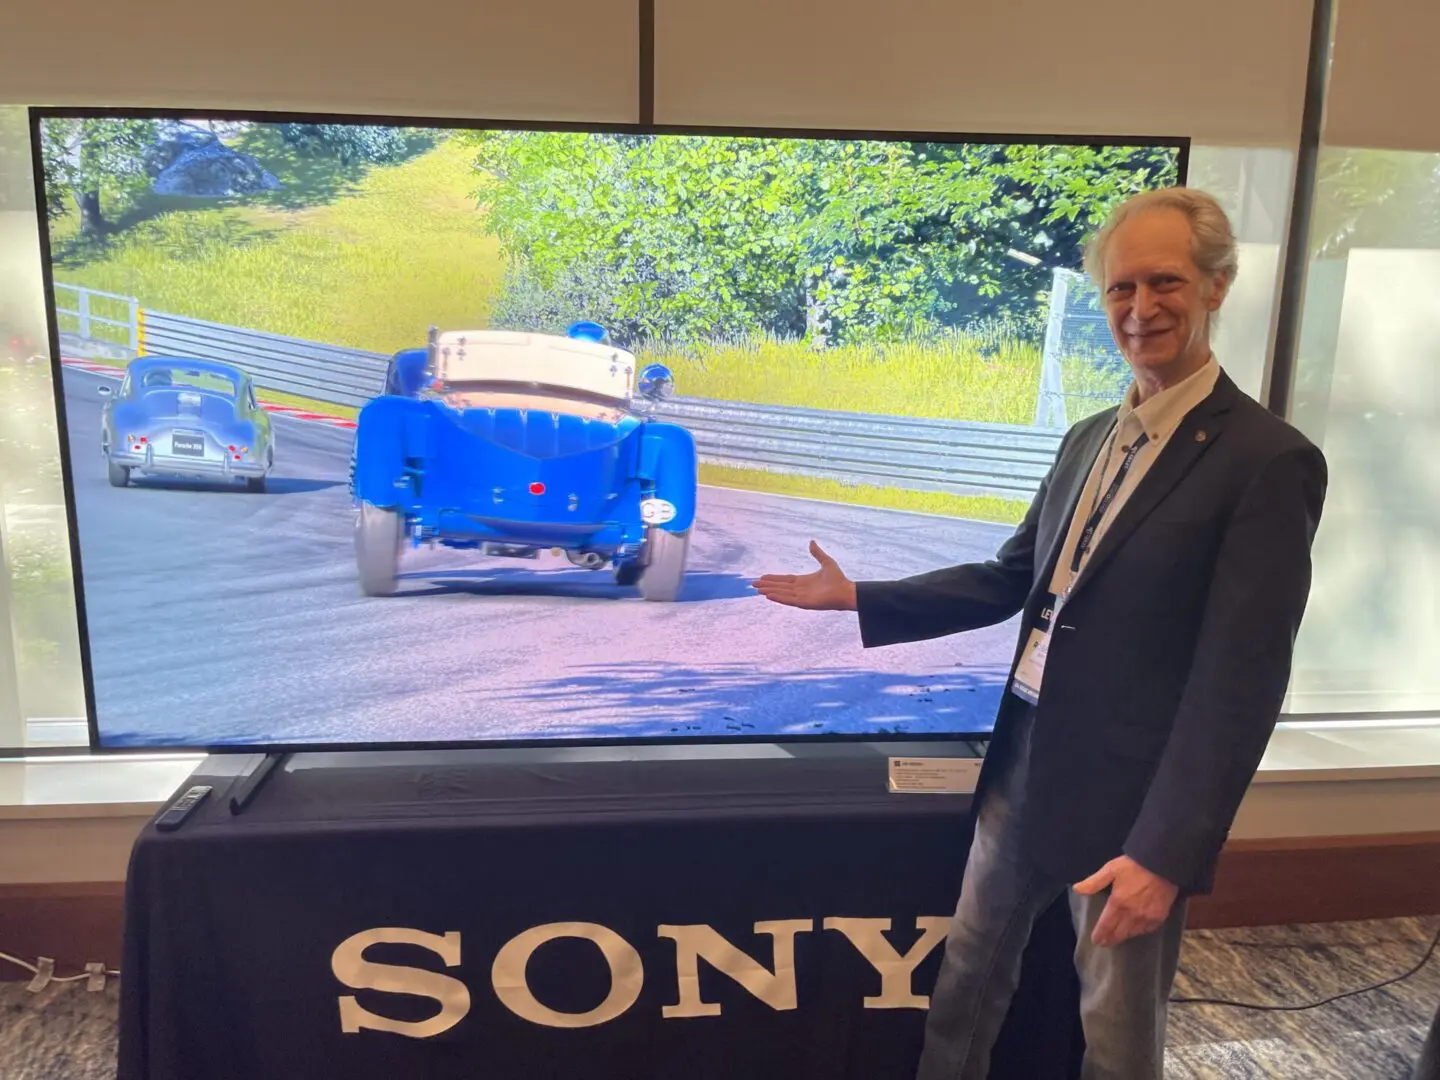 Sony 4K TVs with Google Assistant: Price, Specs, and Release Date